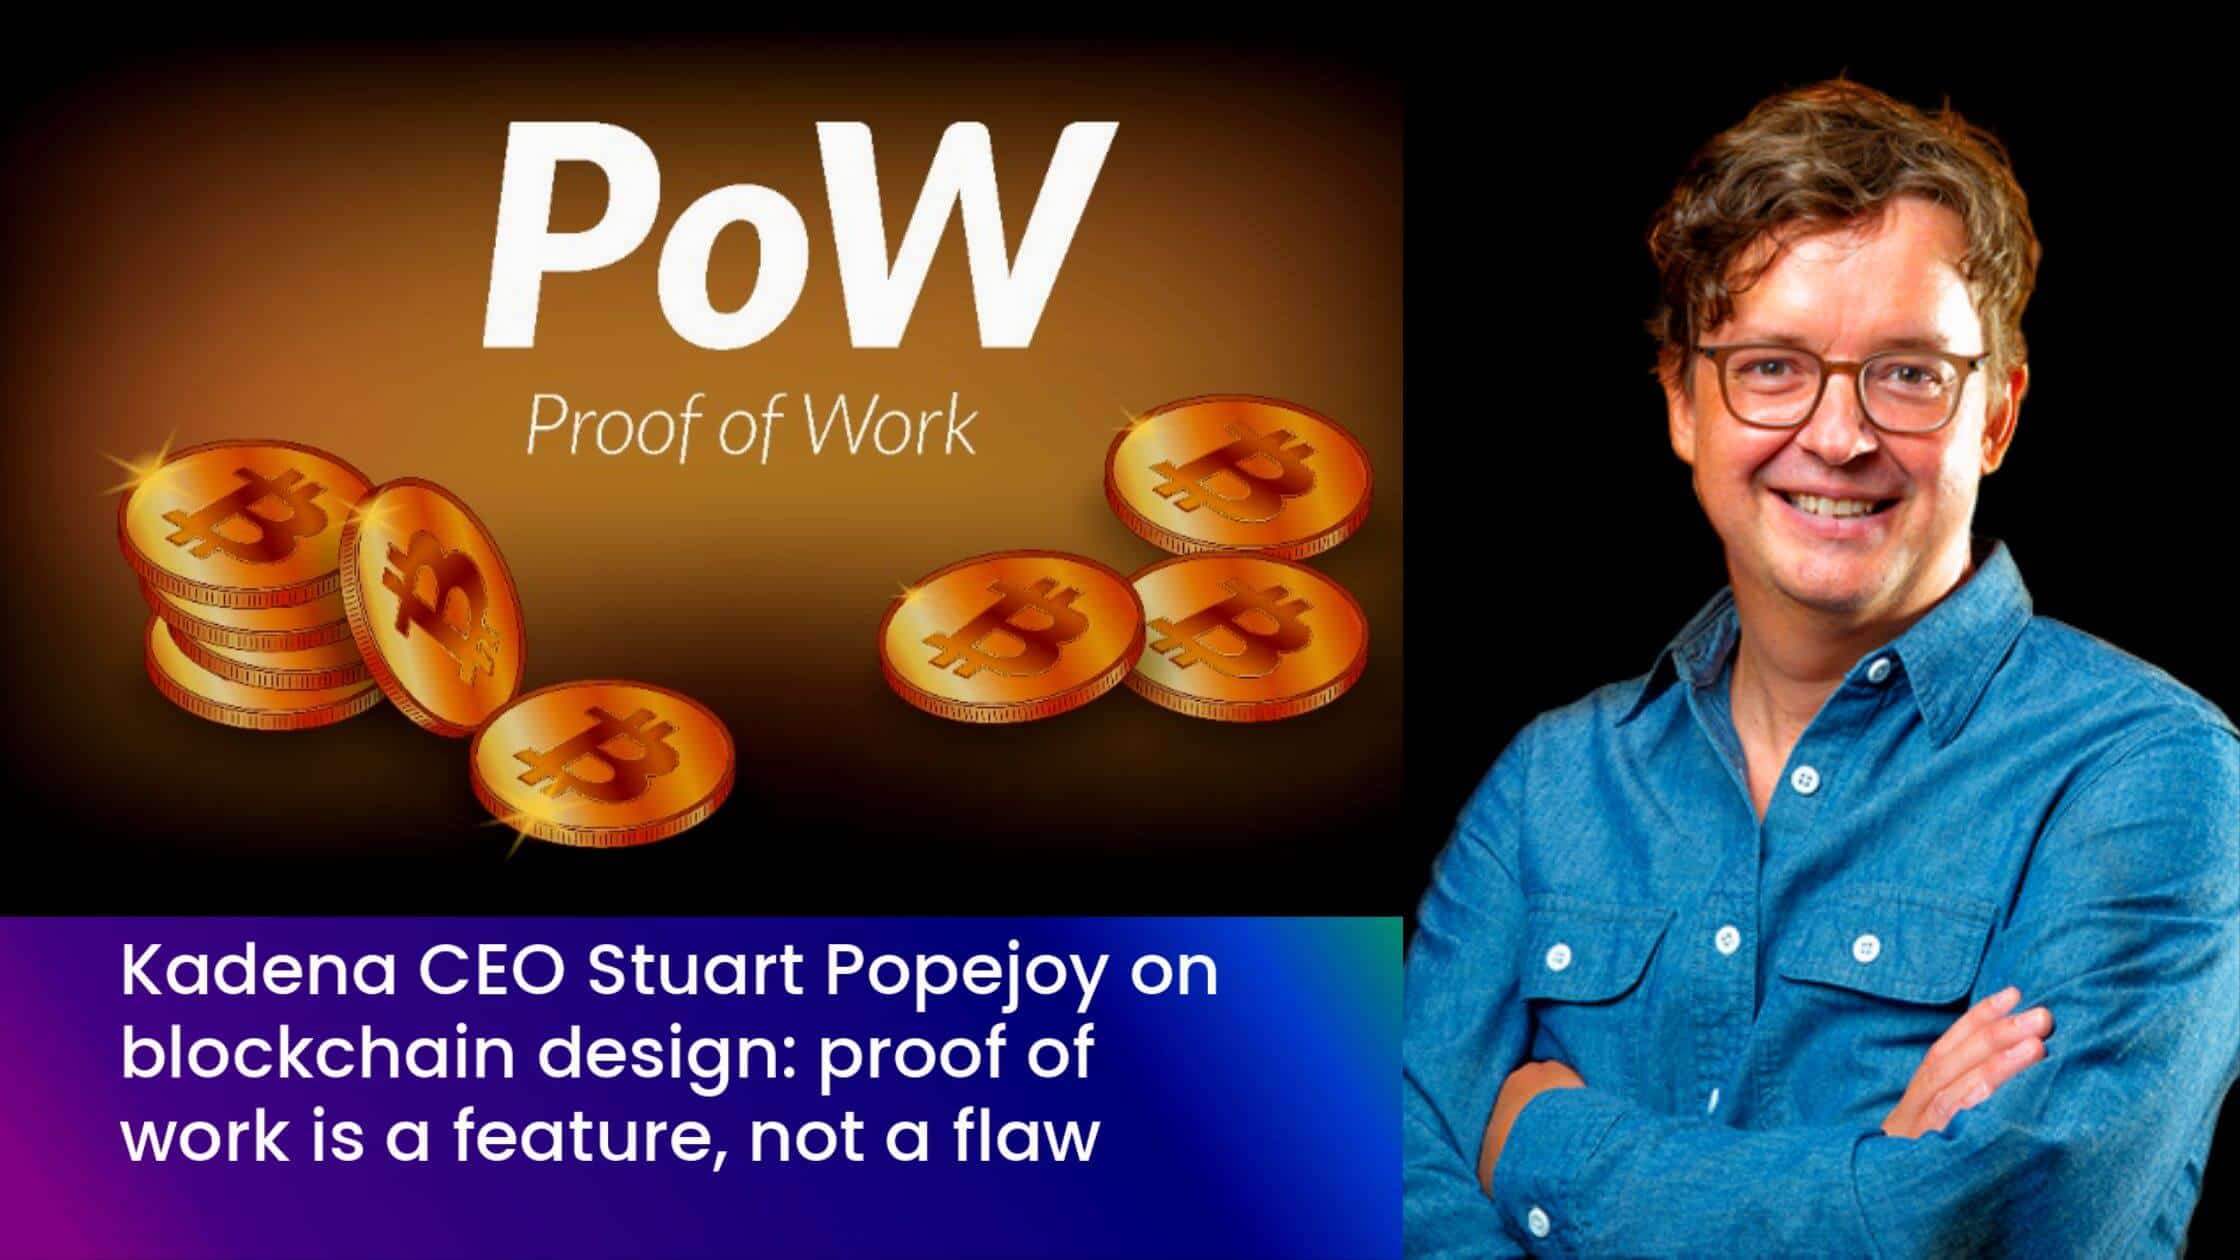  Proof-Of-Work Is A Feature, Not A Flaw Says Kadena CEO Stuart Popejoy On Blockchain Design